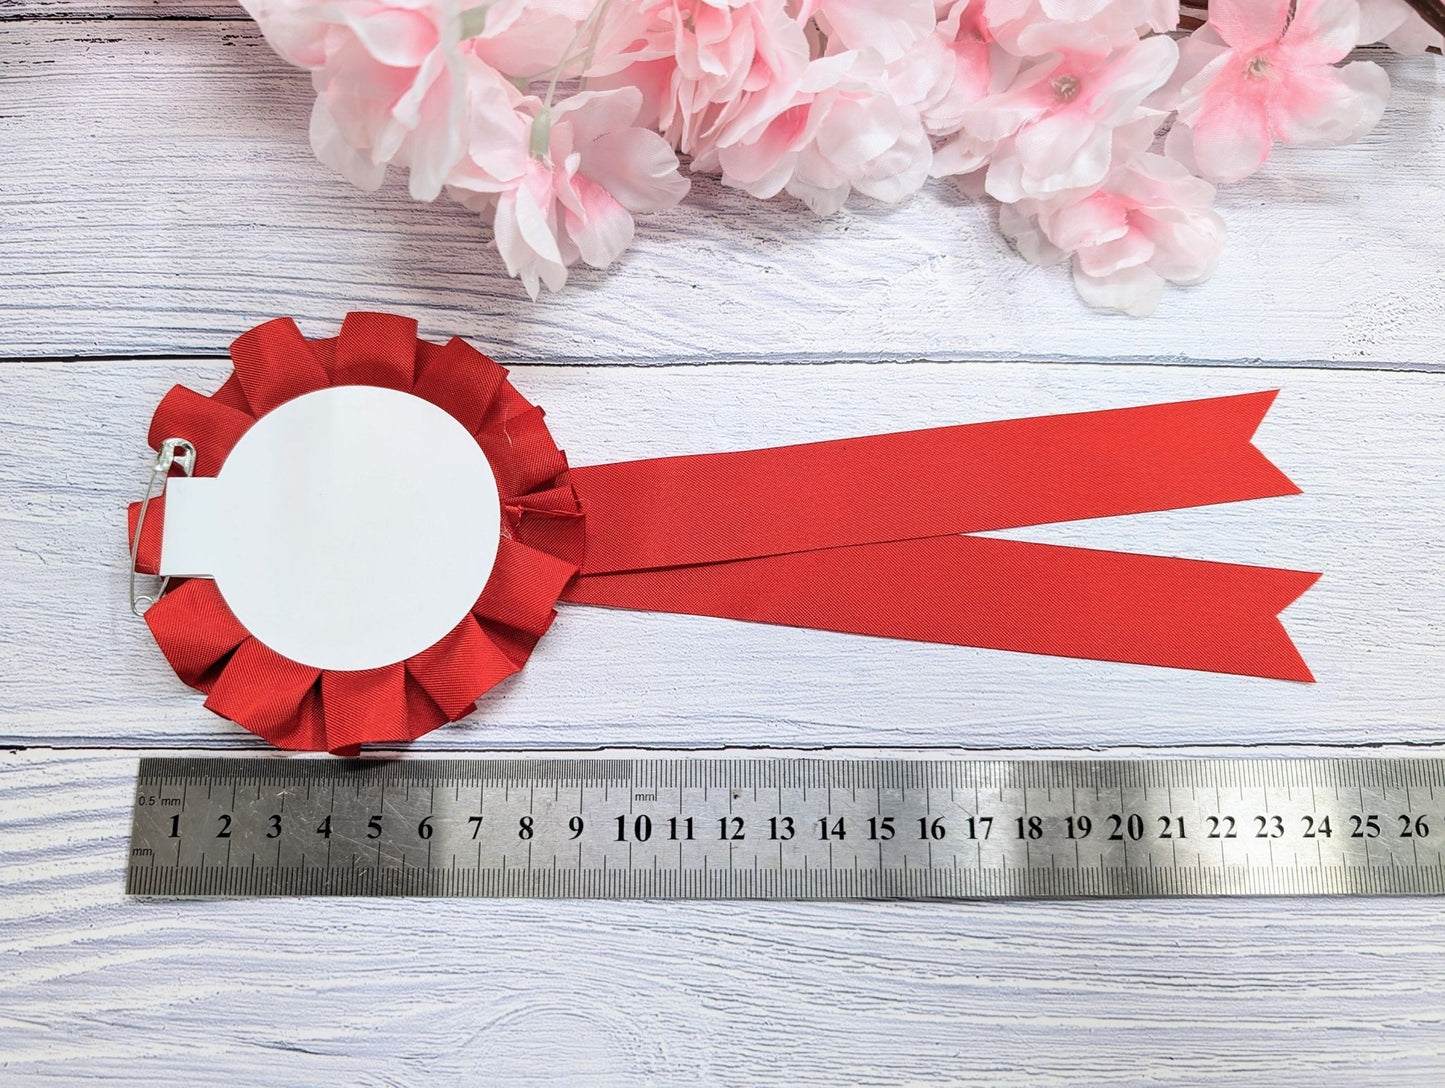 Best Mum & Dad Wooden Rosettes - Eco-Friendly, Welsh Craft | Unique Parent Awards, Handcrafted Sustainable Wood, Customisable - CherryGroveCraft